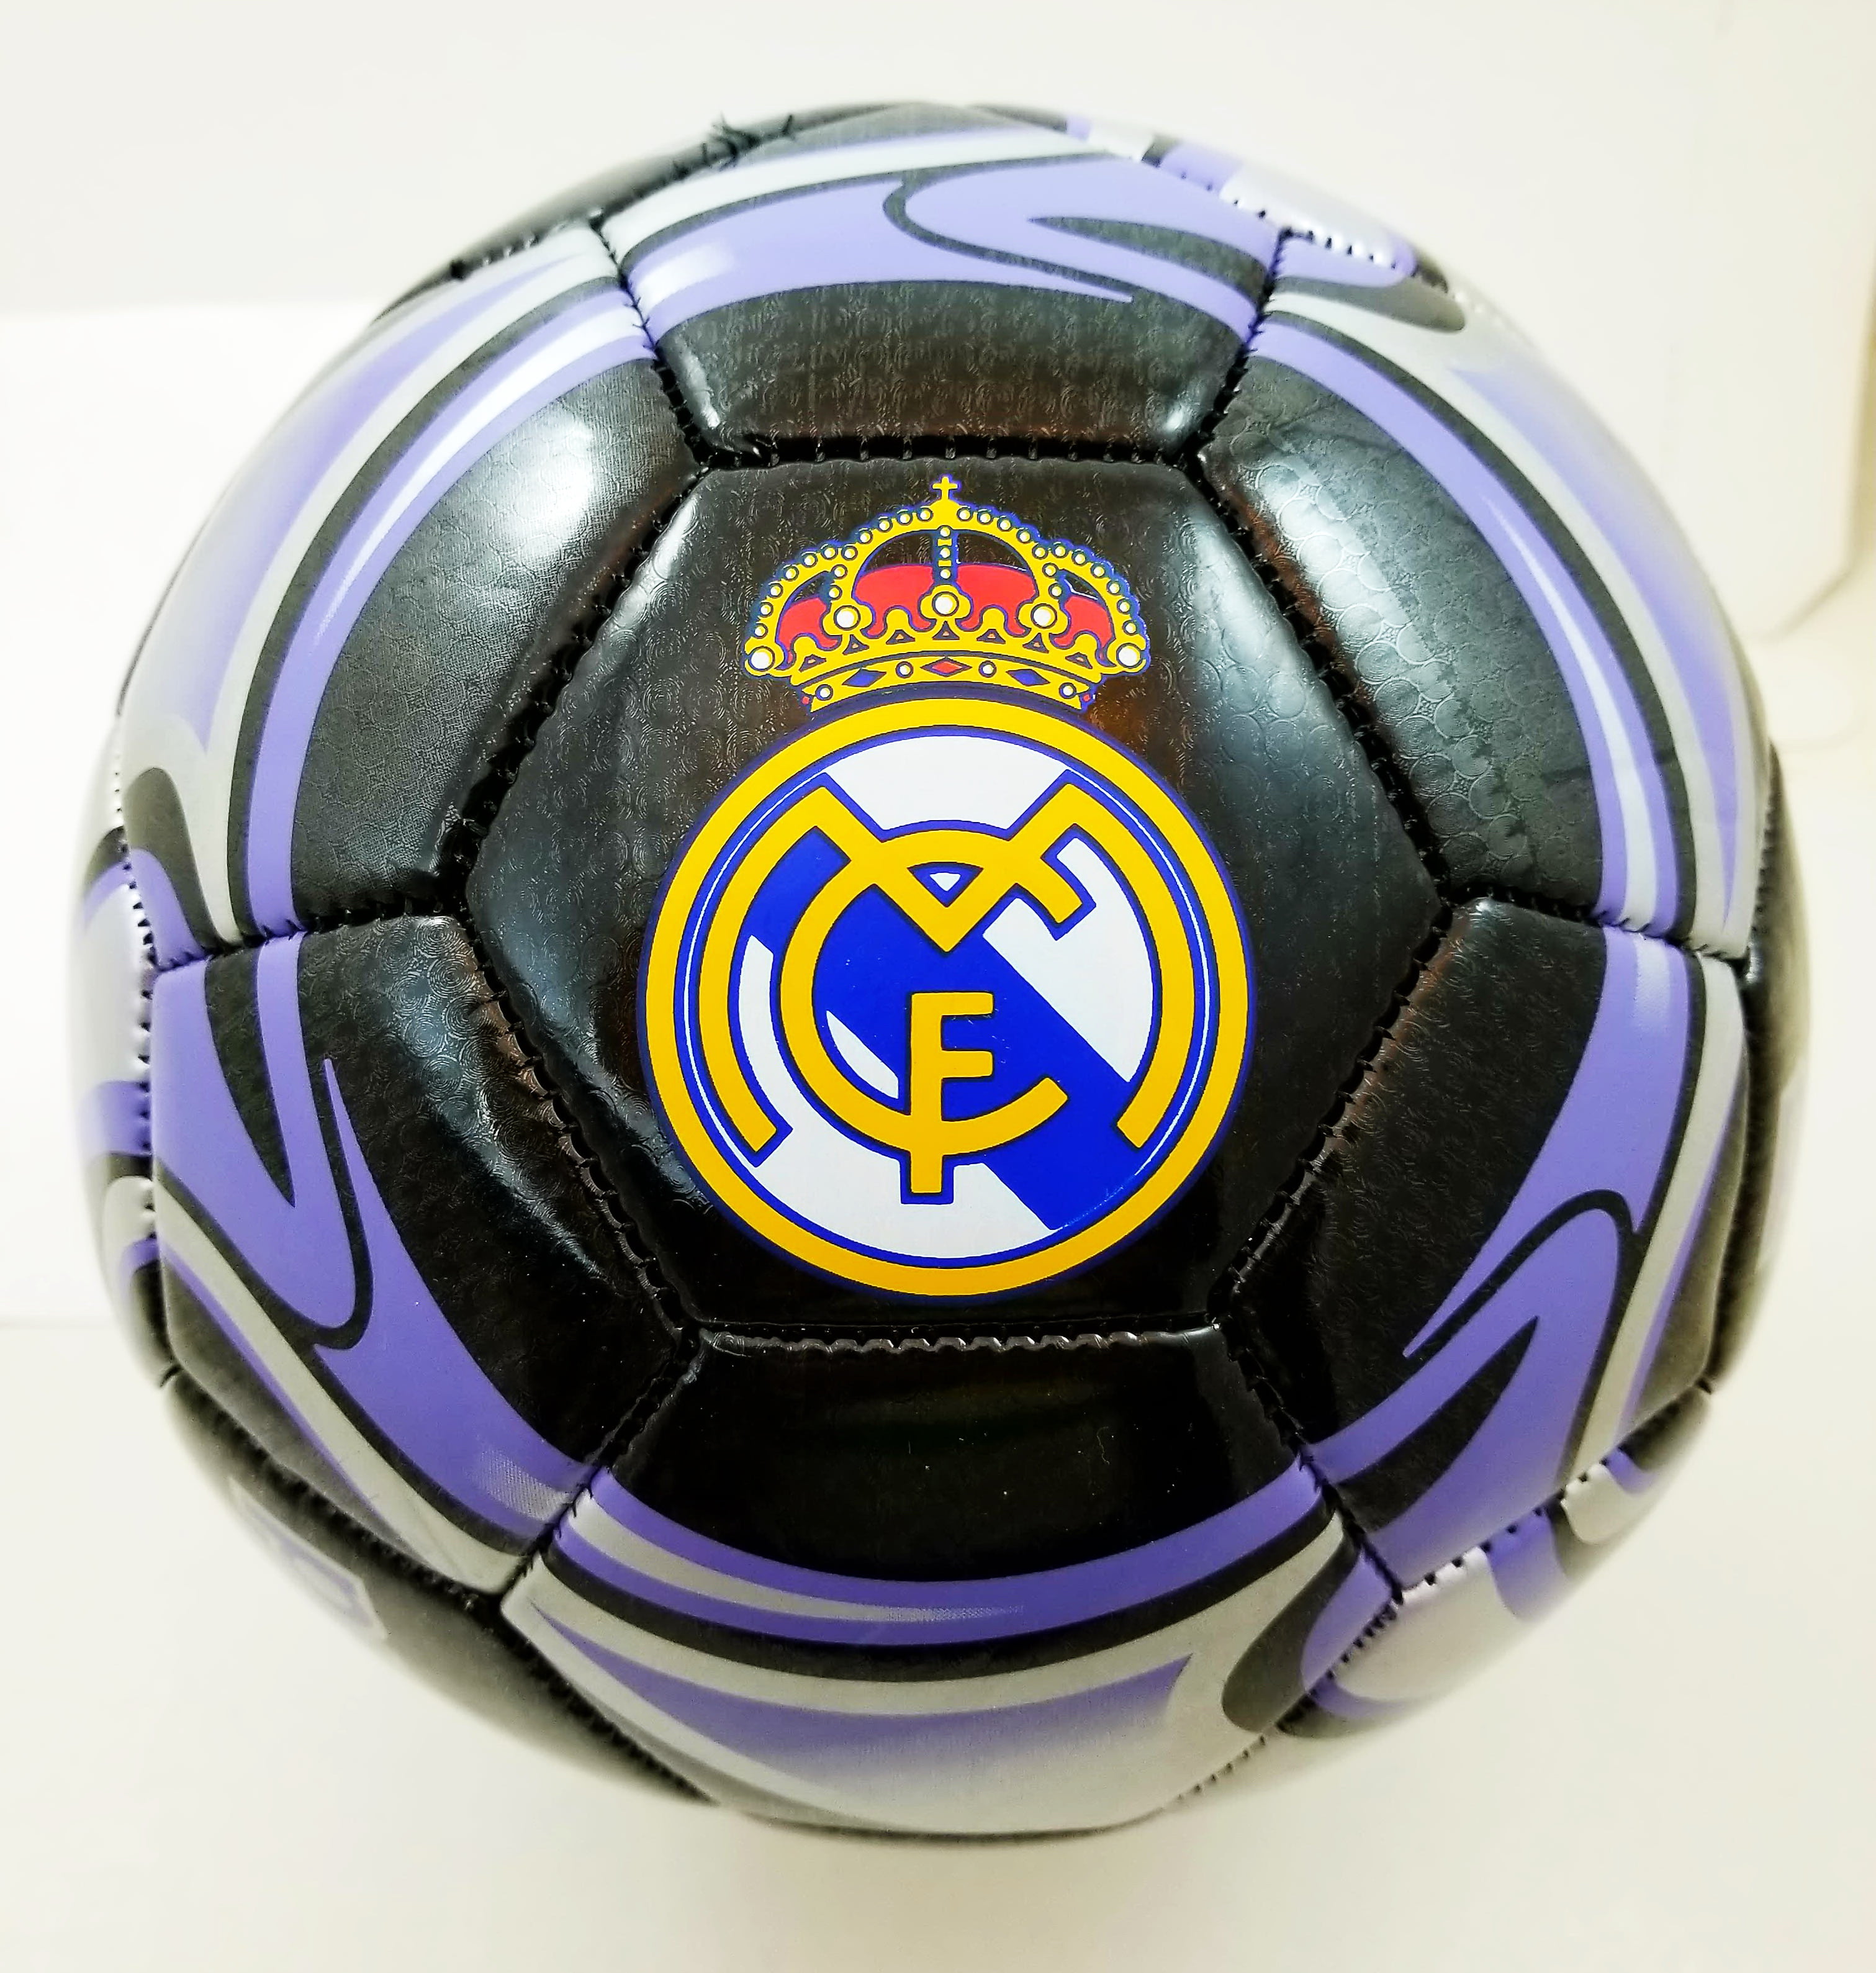 Real Madrid C.F Authentic Official Licensed Soccer Ball Size 3-02-2 